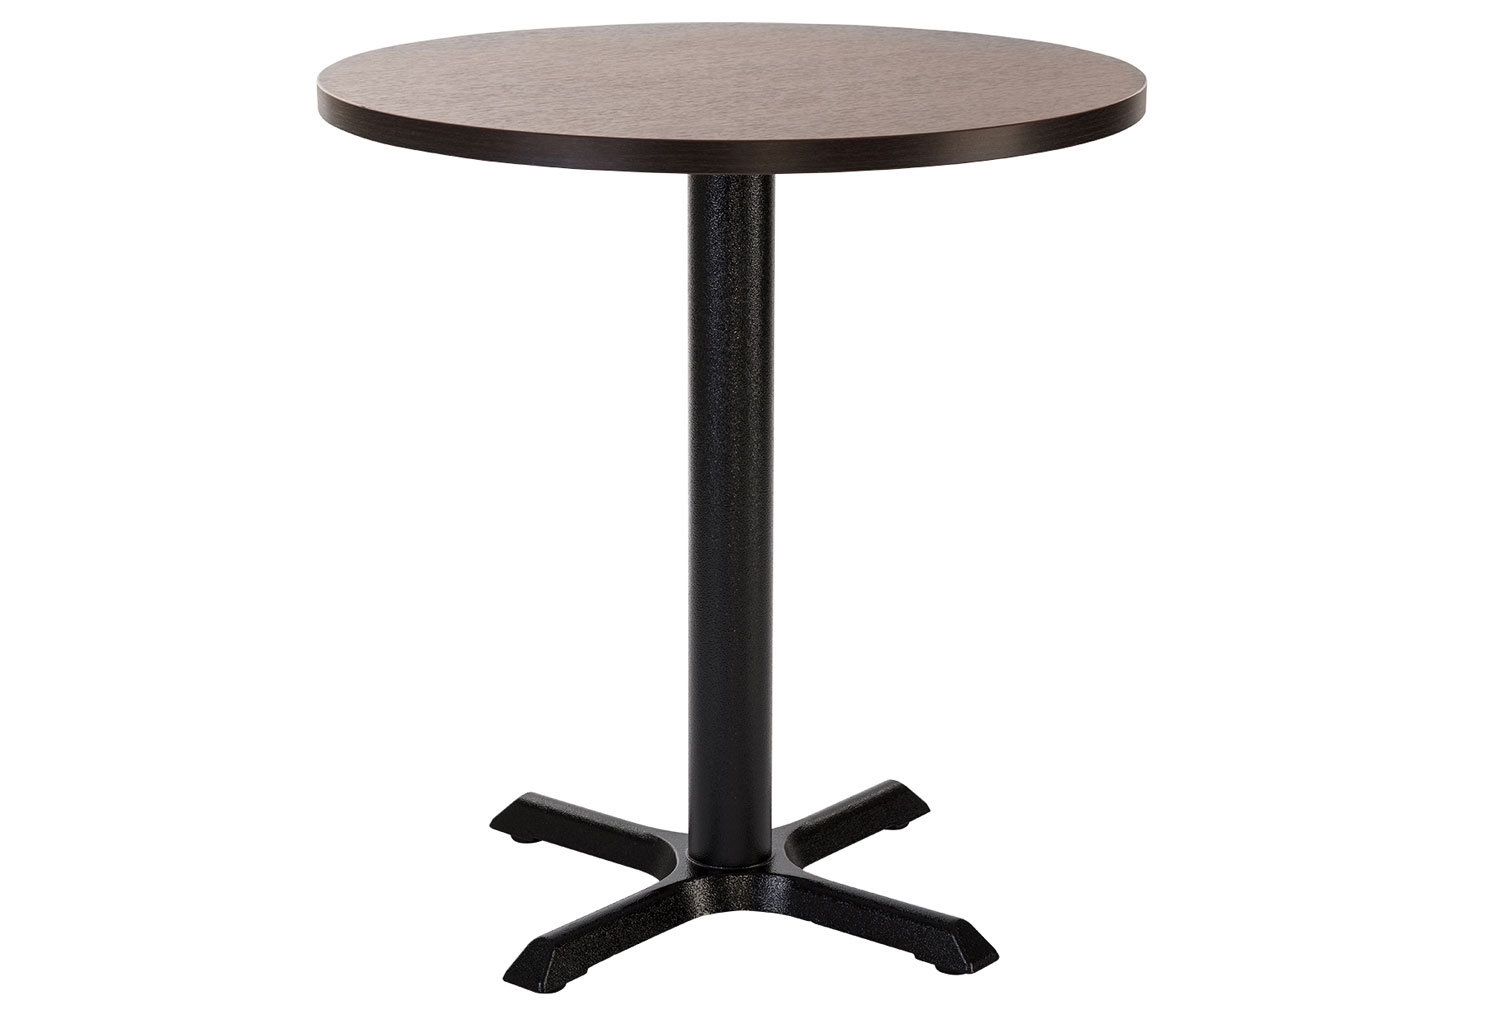 Ojai Round Dining Table (Black), 120dia (cm), Black, Express Delivery